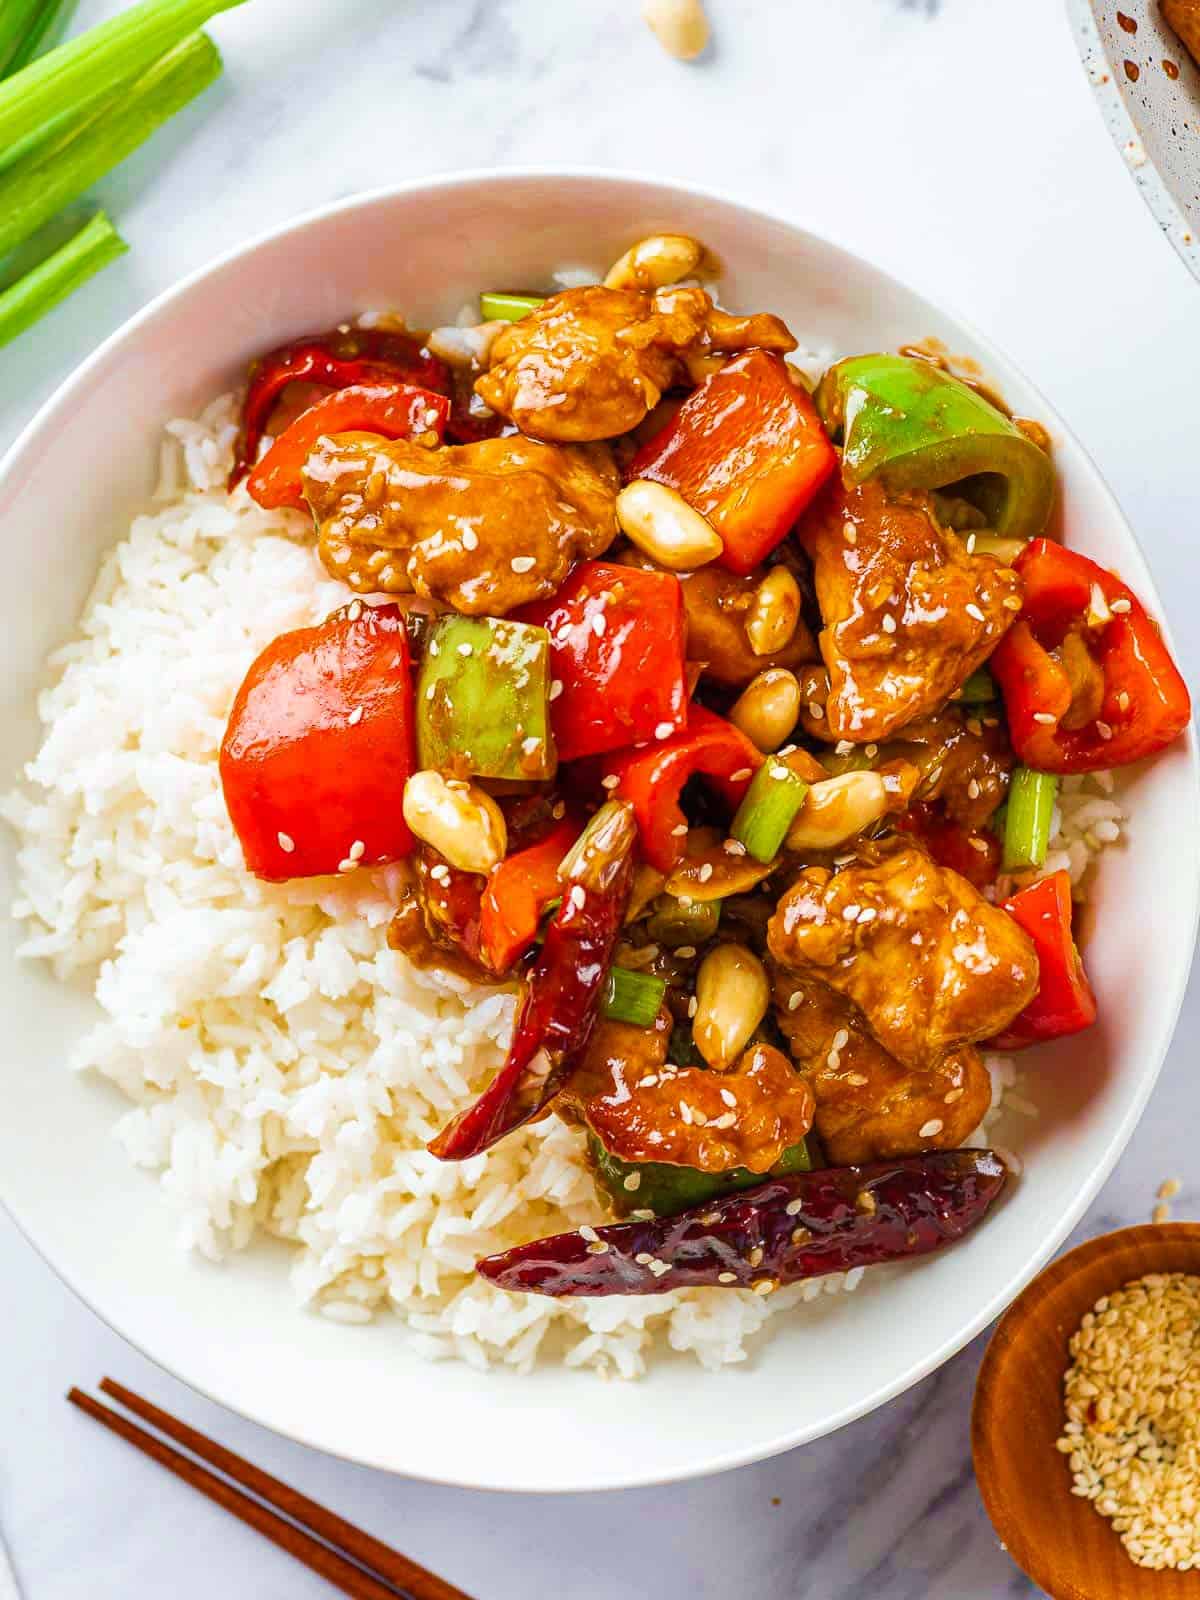 How To Make A Kung Pao Chicken Recipe: Easy & Delicious!